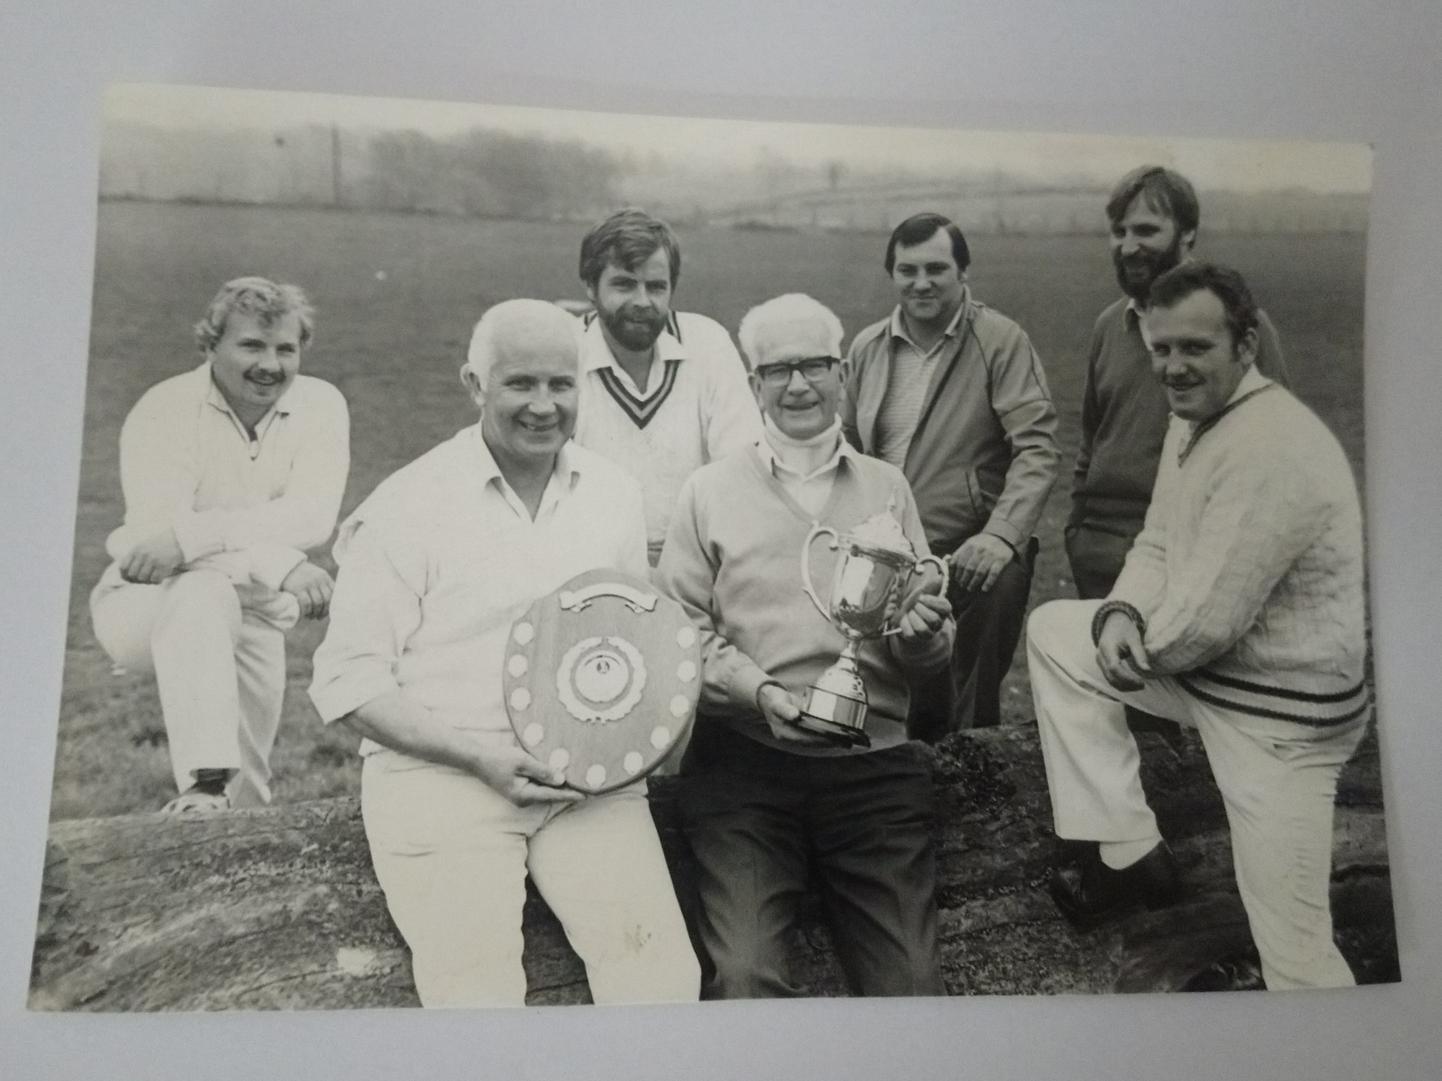 "No one told me my foot would be in the picture." Classic cricket whites and works shoes combination from the trophy-winning Bishops Itchington in 1984.